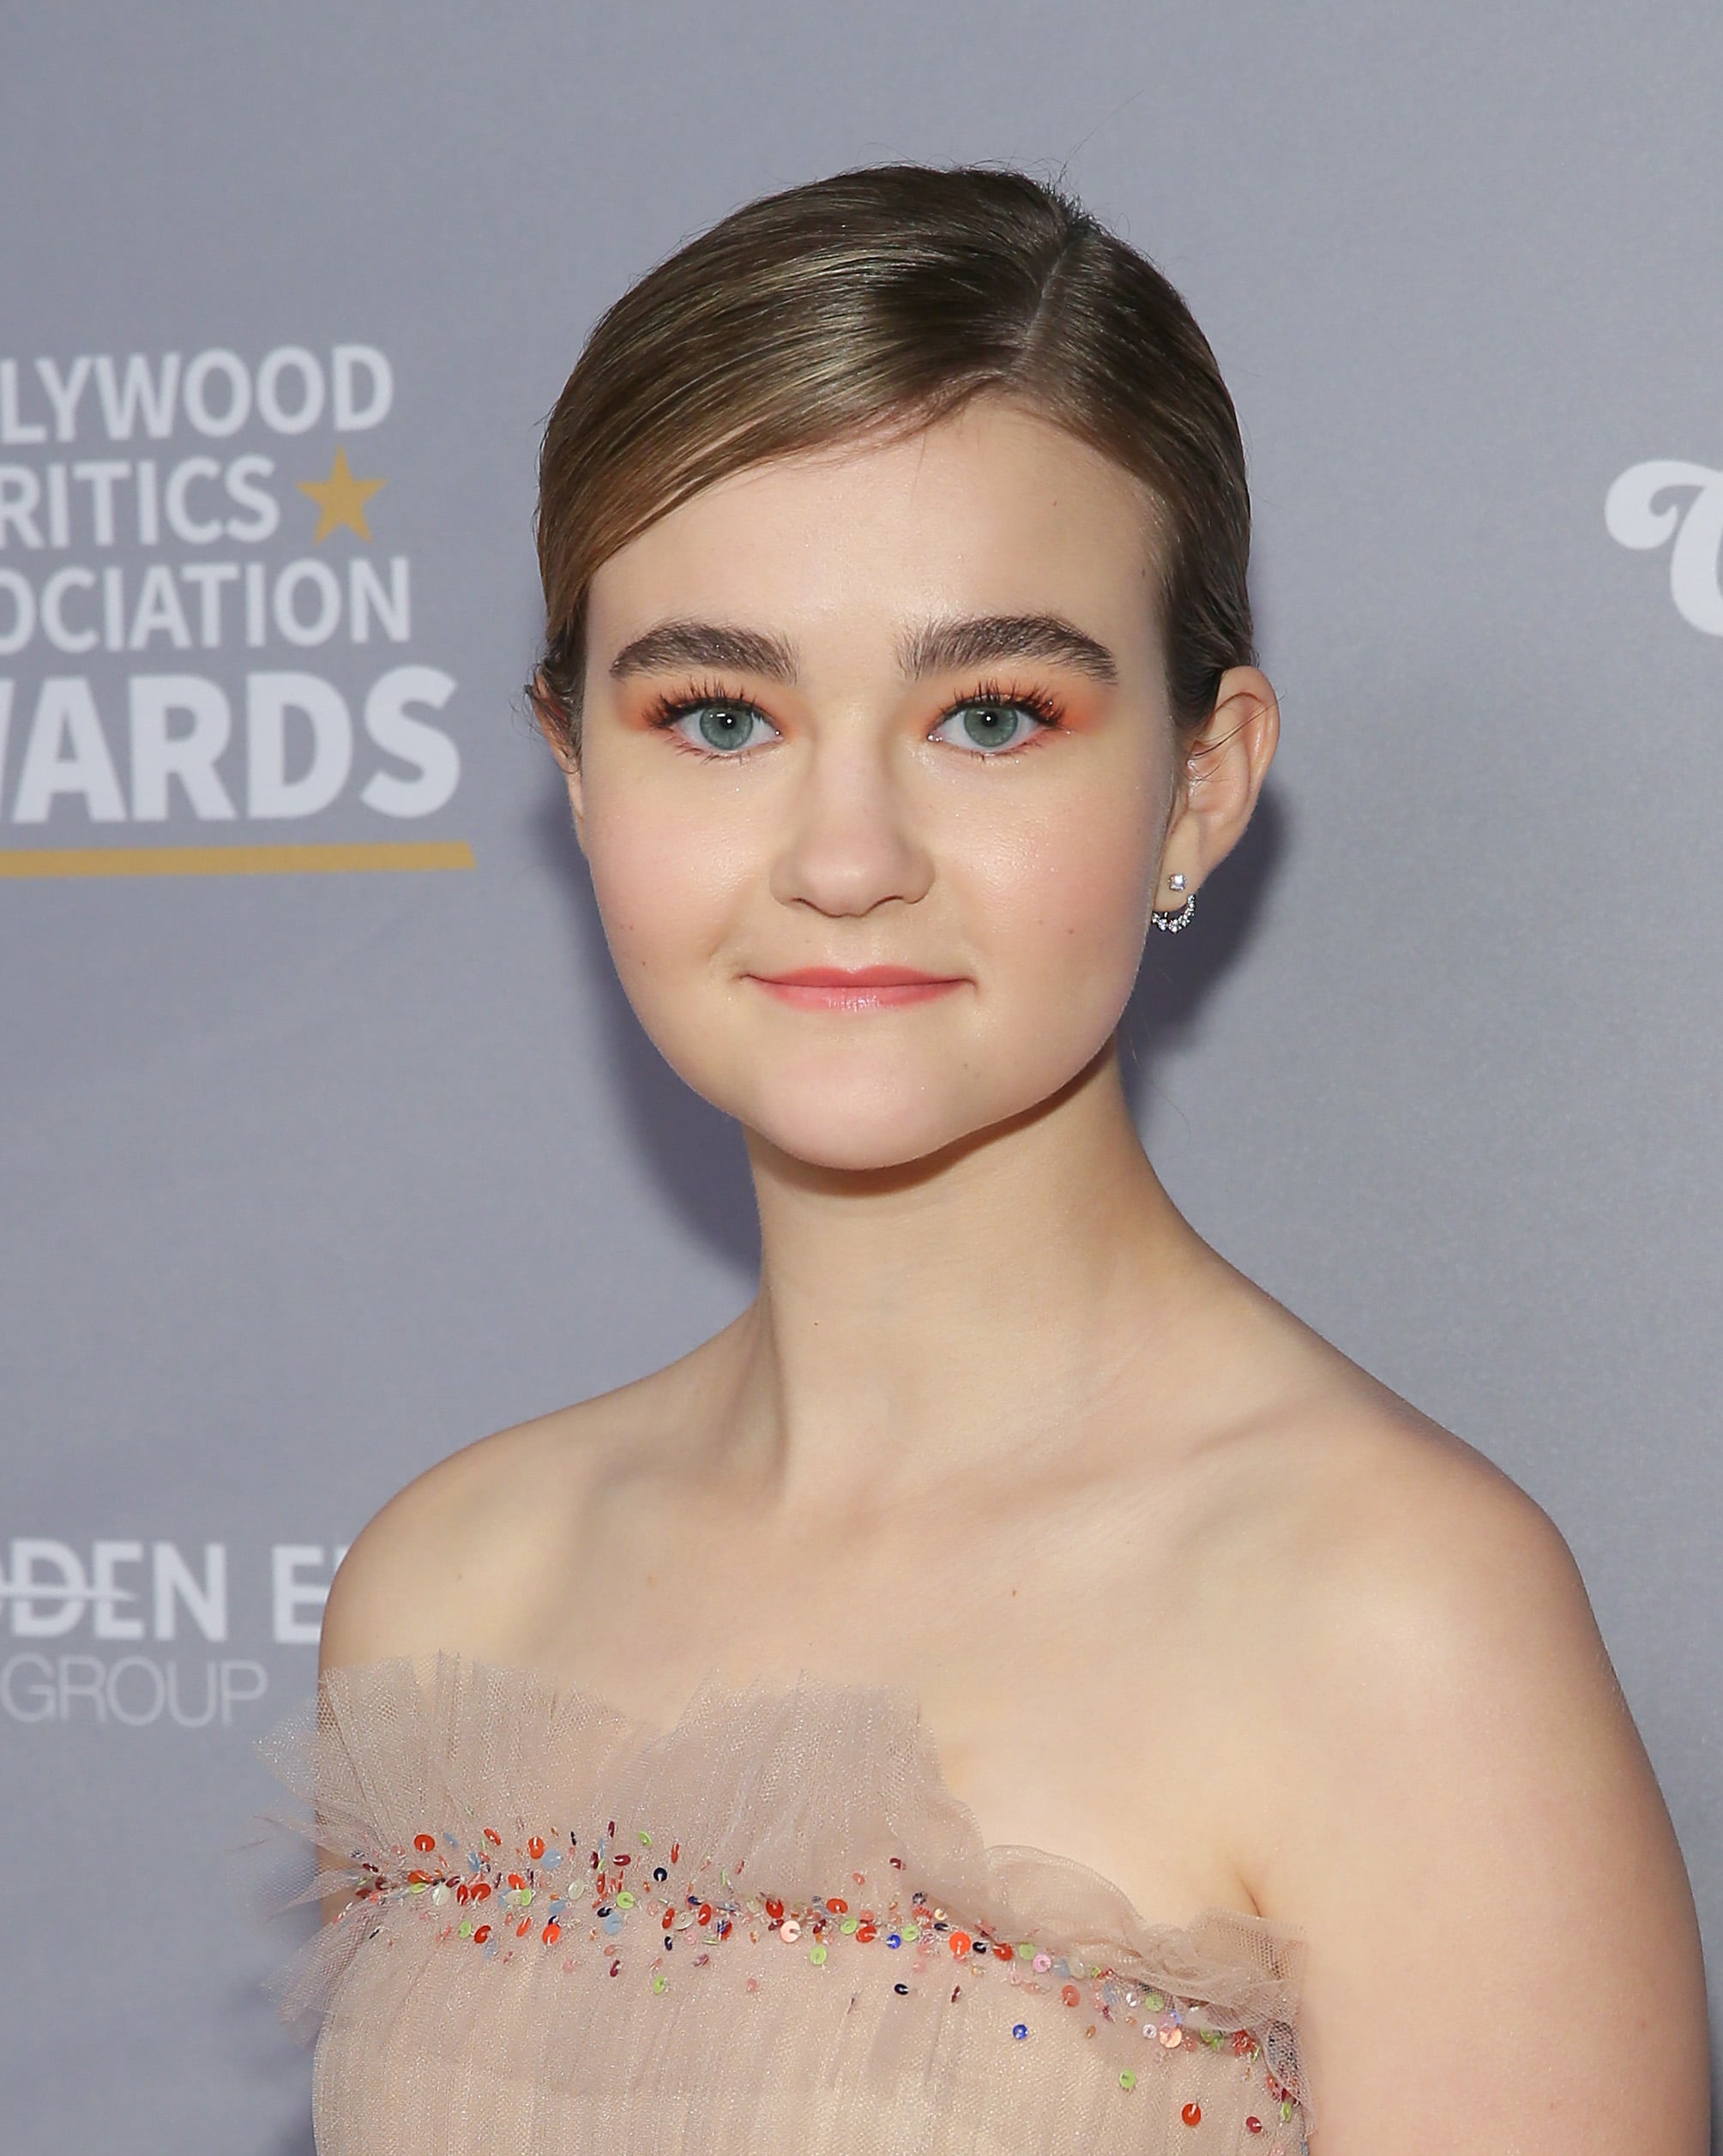 Millicent-Simmonds-on-Advocating-for-Representation.jpg.